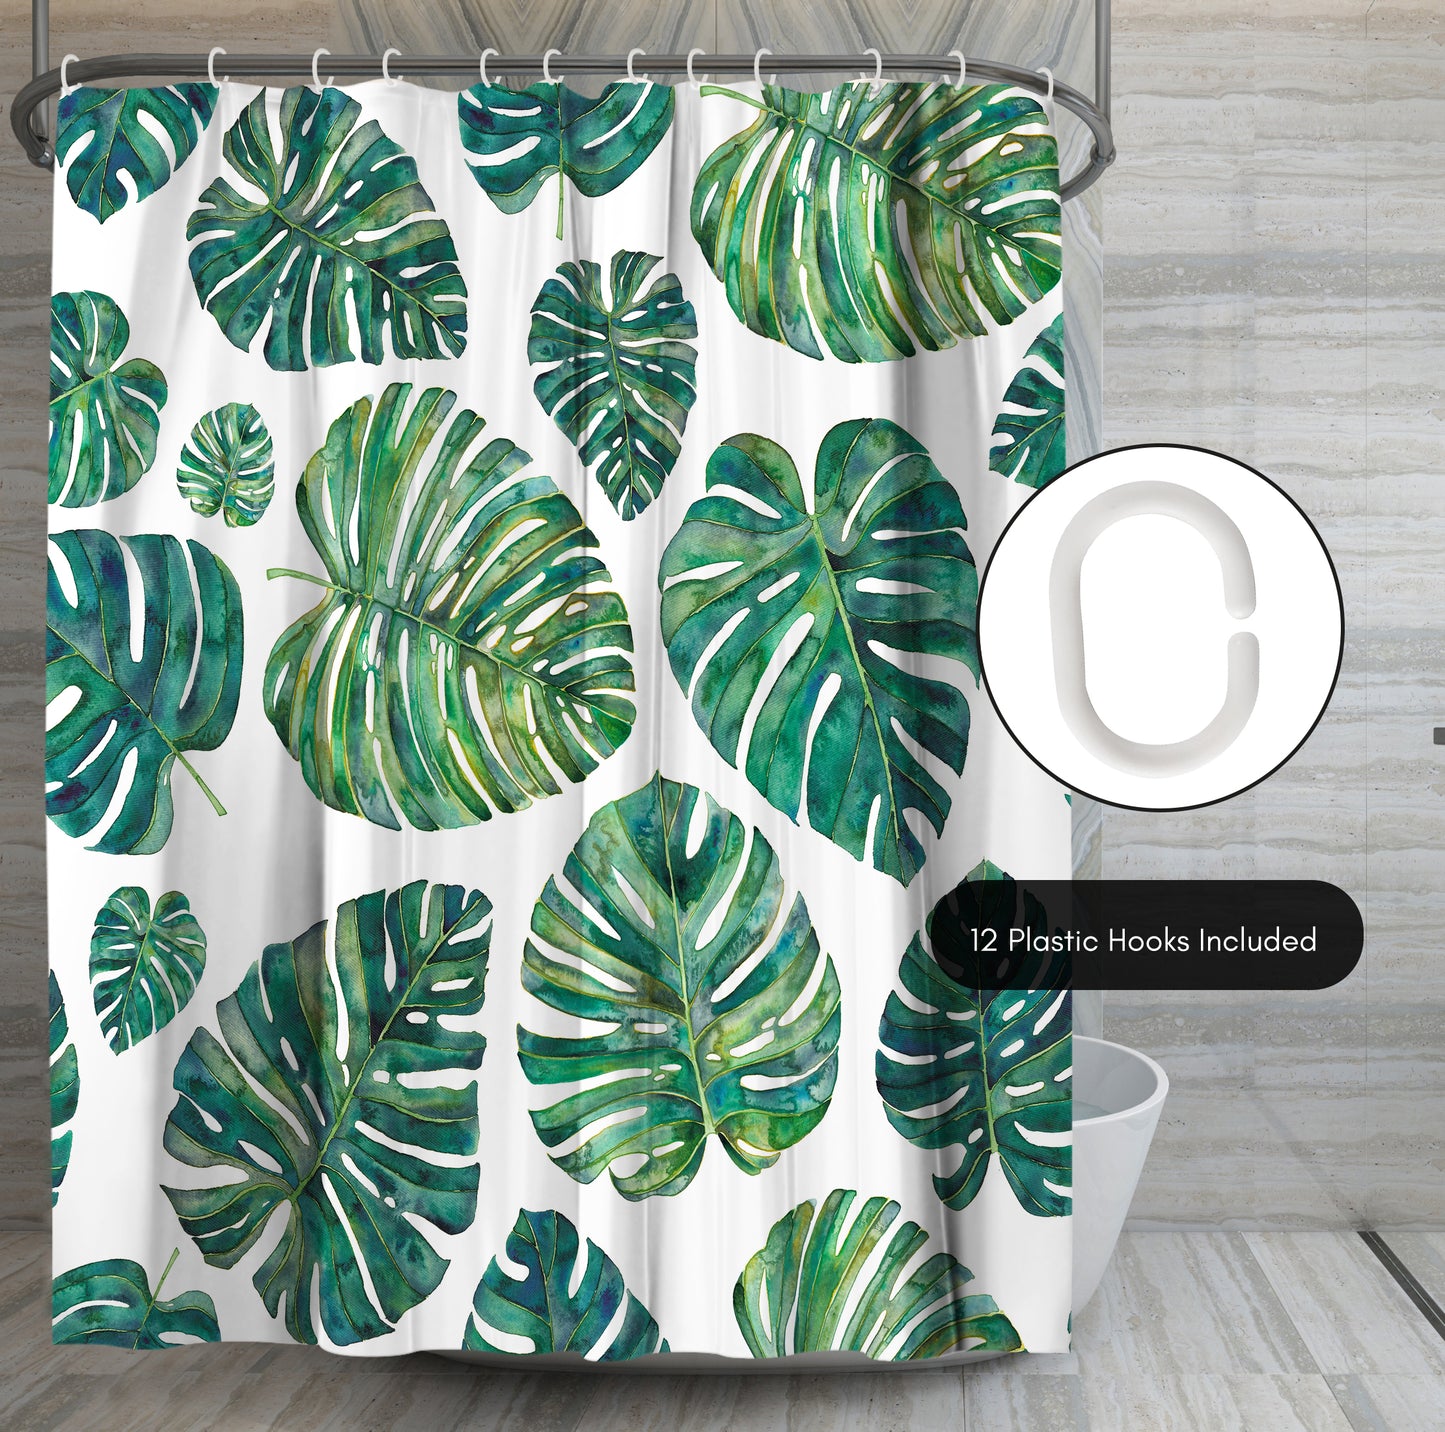 71" x 74" Decorative Shower Curtain with 12 Hooks, Tropical Leaves by Elena O'Neill